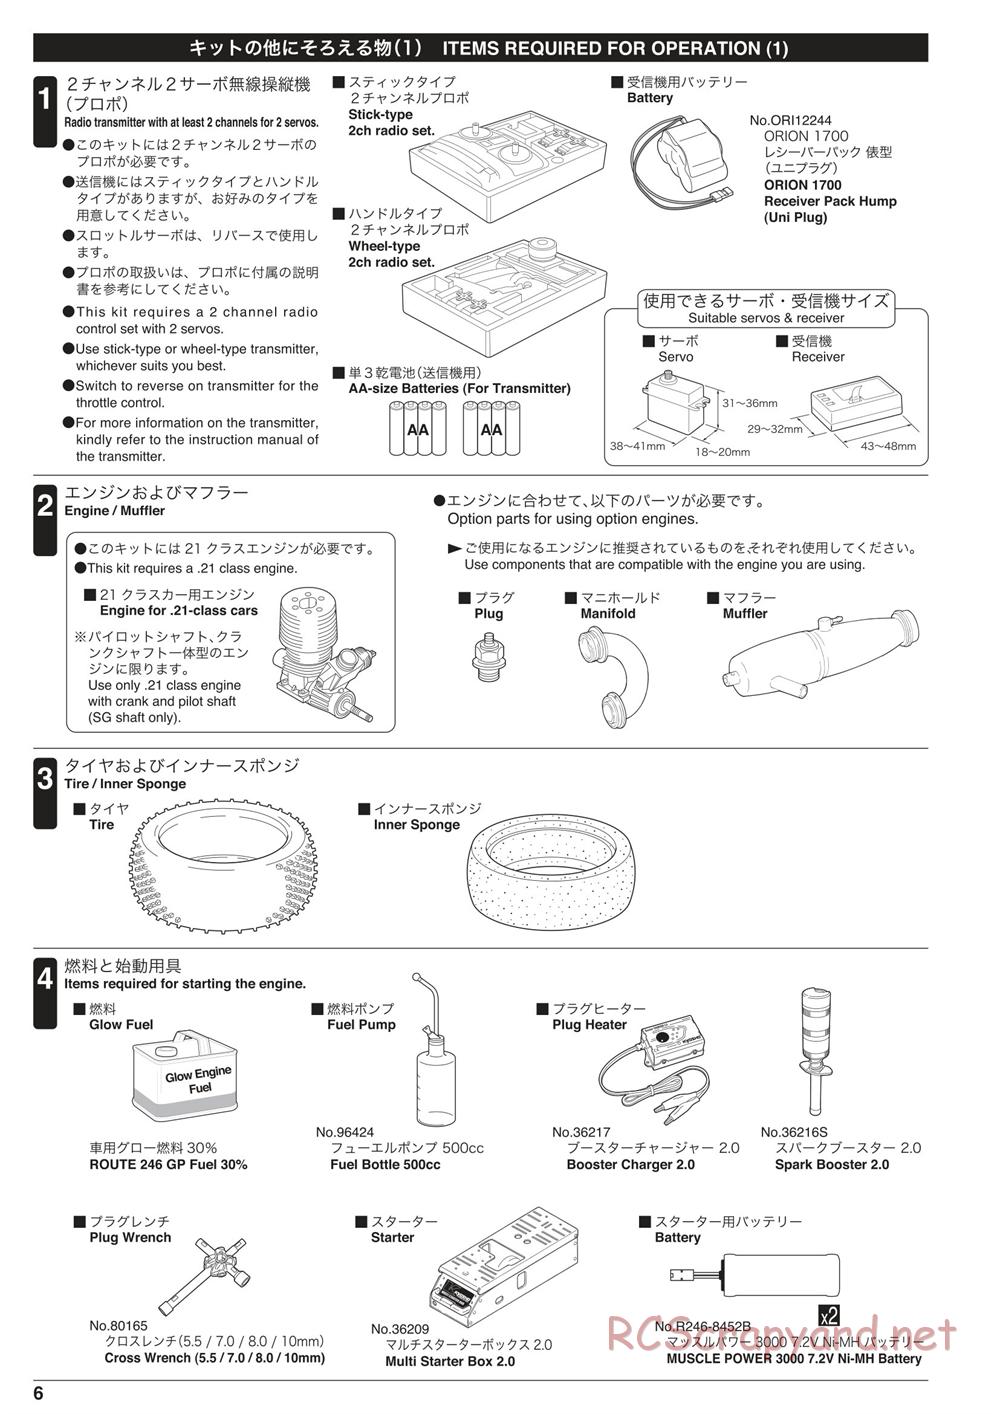 Kyosho - Inferno MP10 - Manual - Page 6